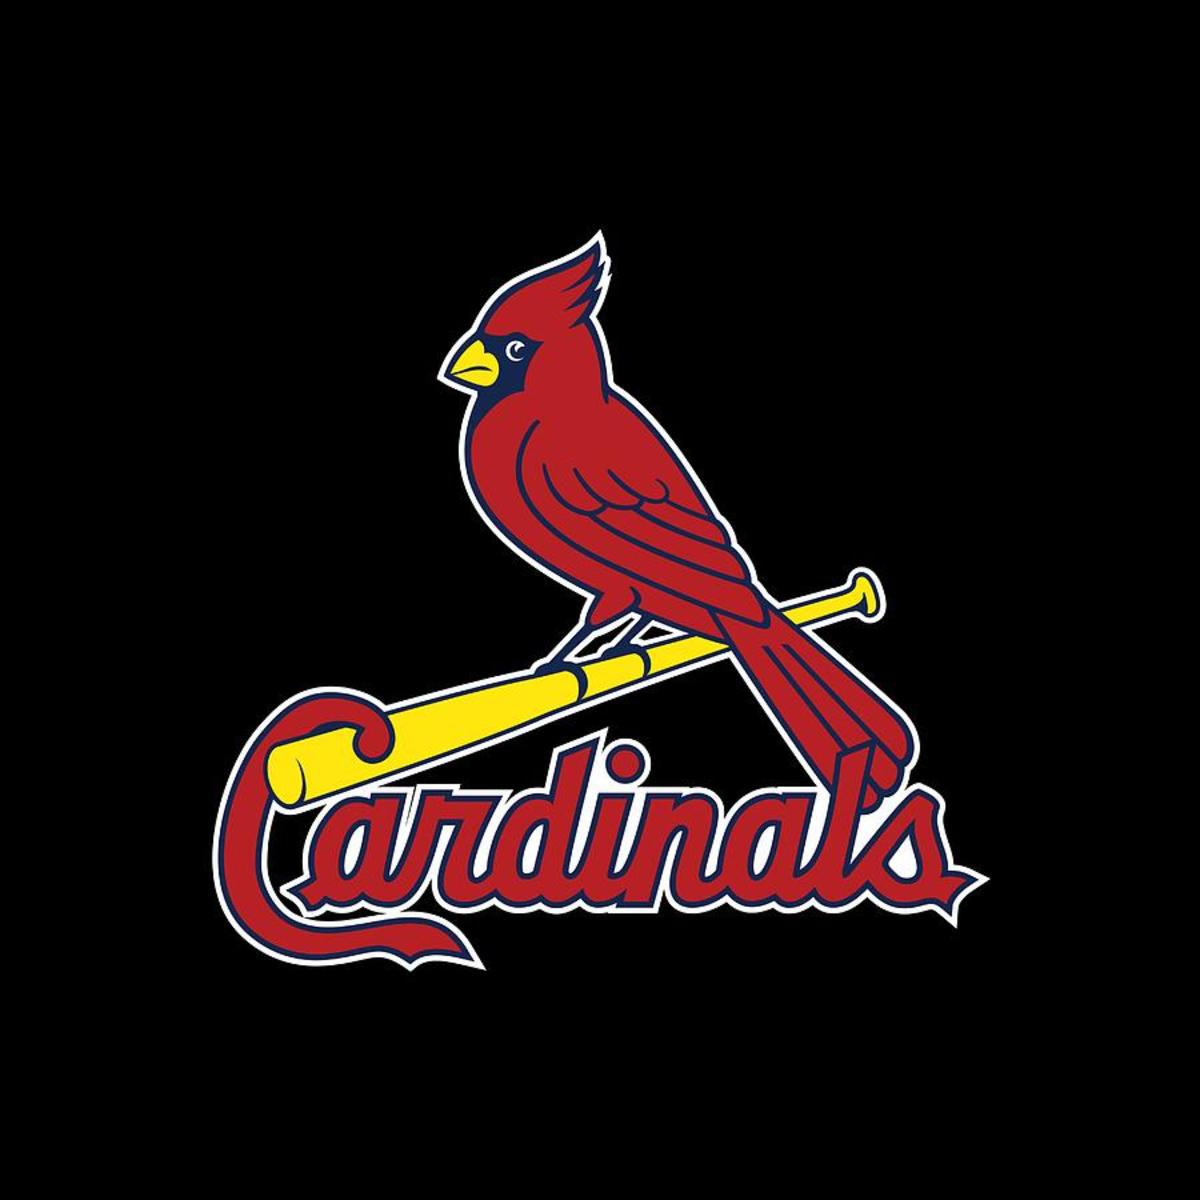 In 1964, the St. Louis Cardinals won the World Series.